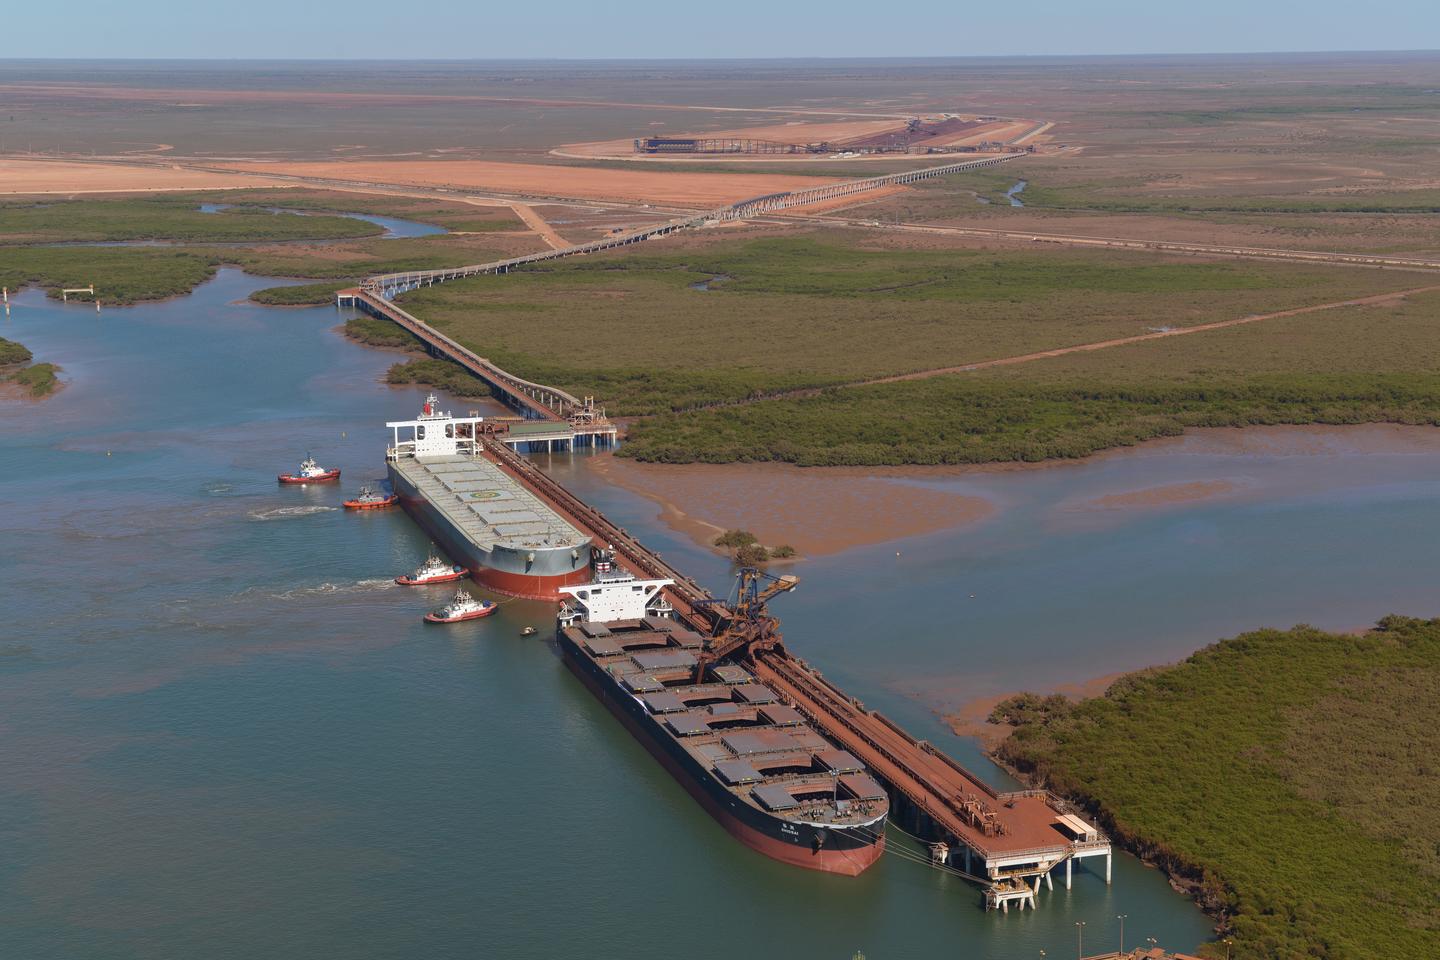 Pilbara ports exports rise by 3% in FY20